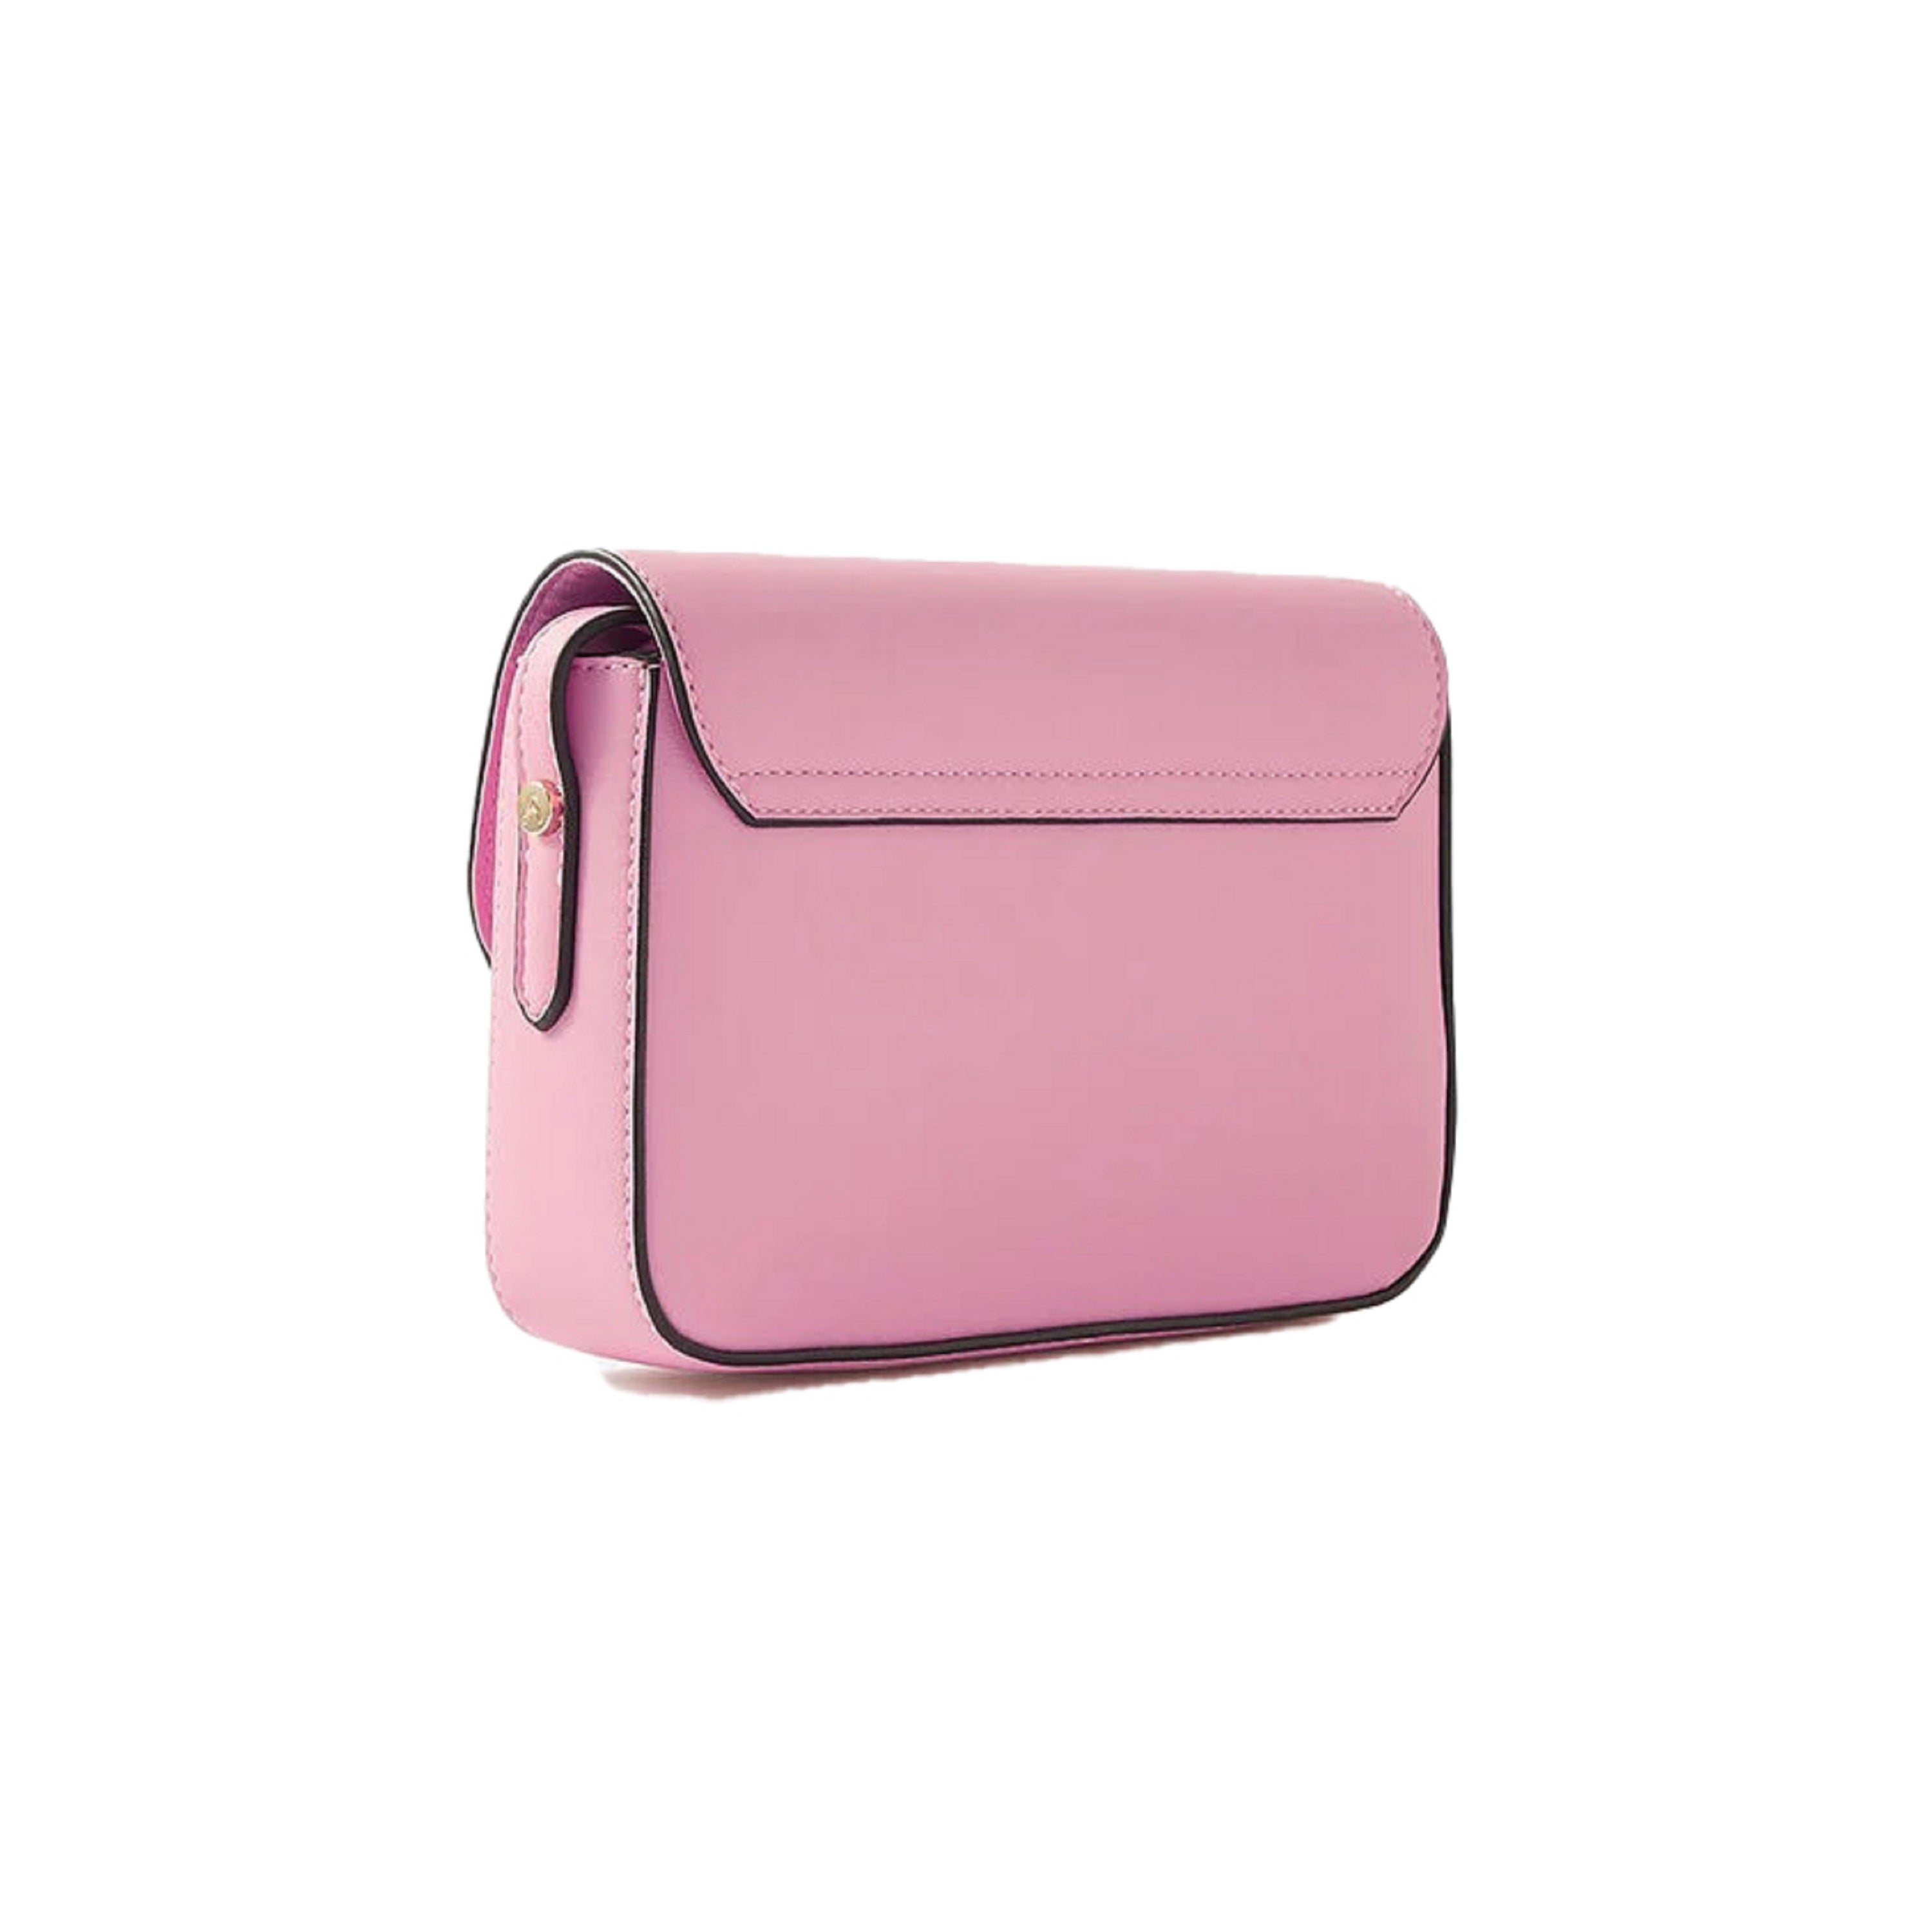 Accessorize London Women's Faux Leather Pink Lexi Lock Sling bag - Accessorize India